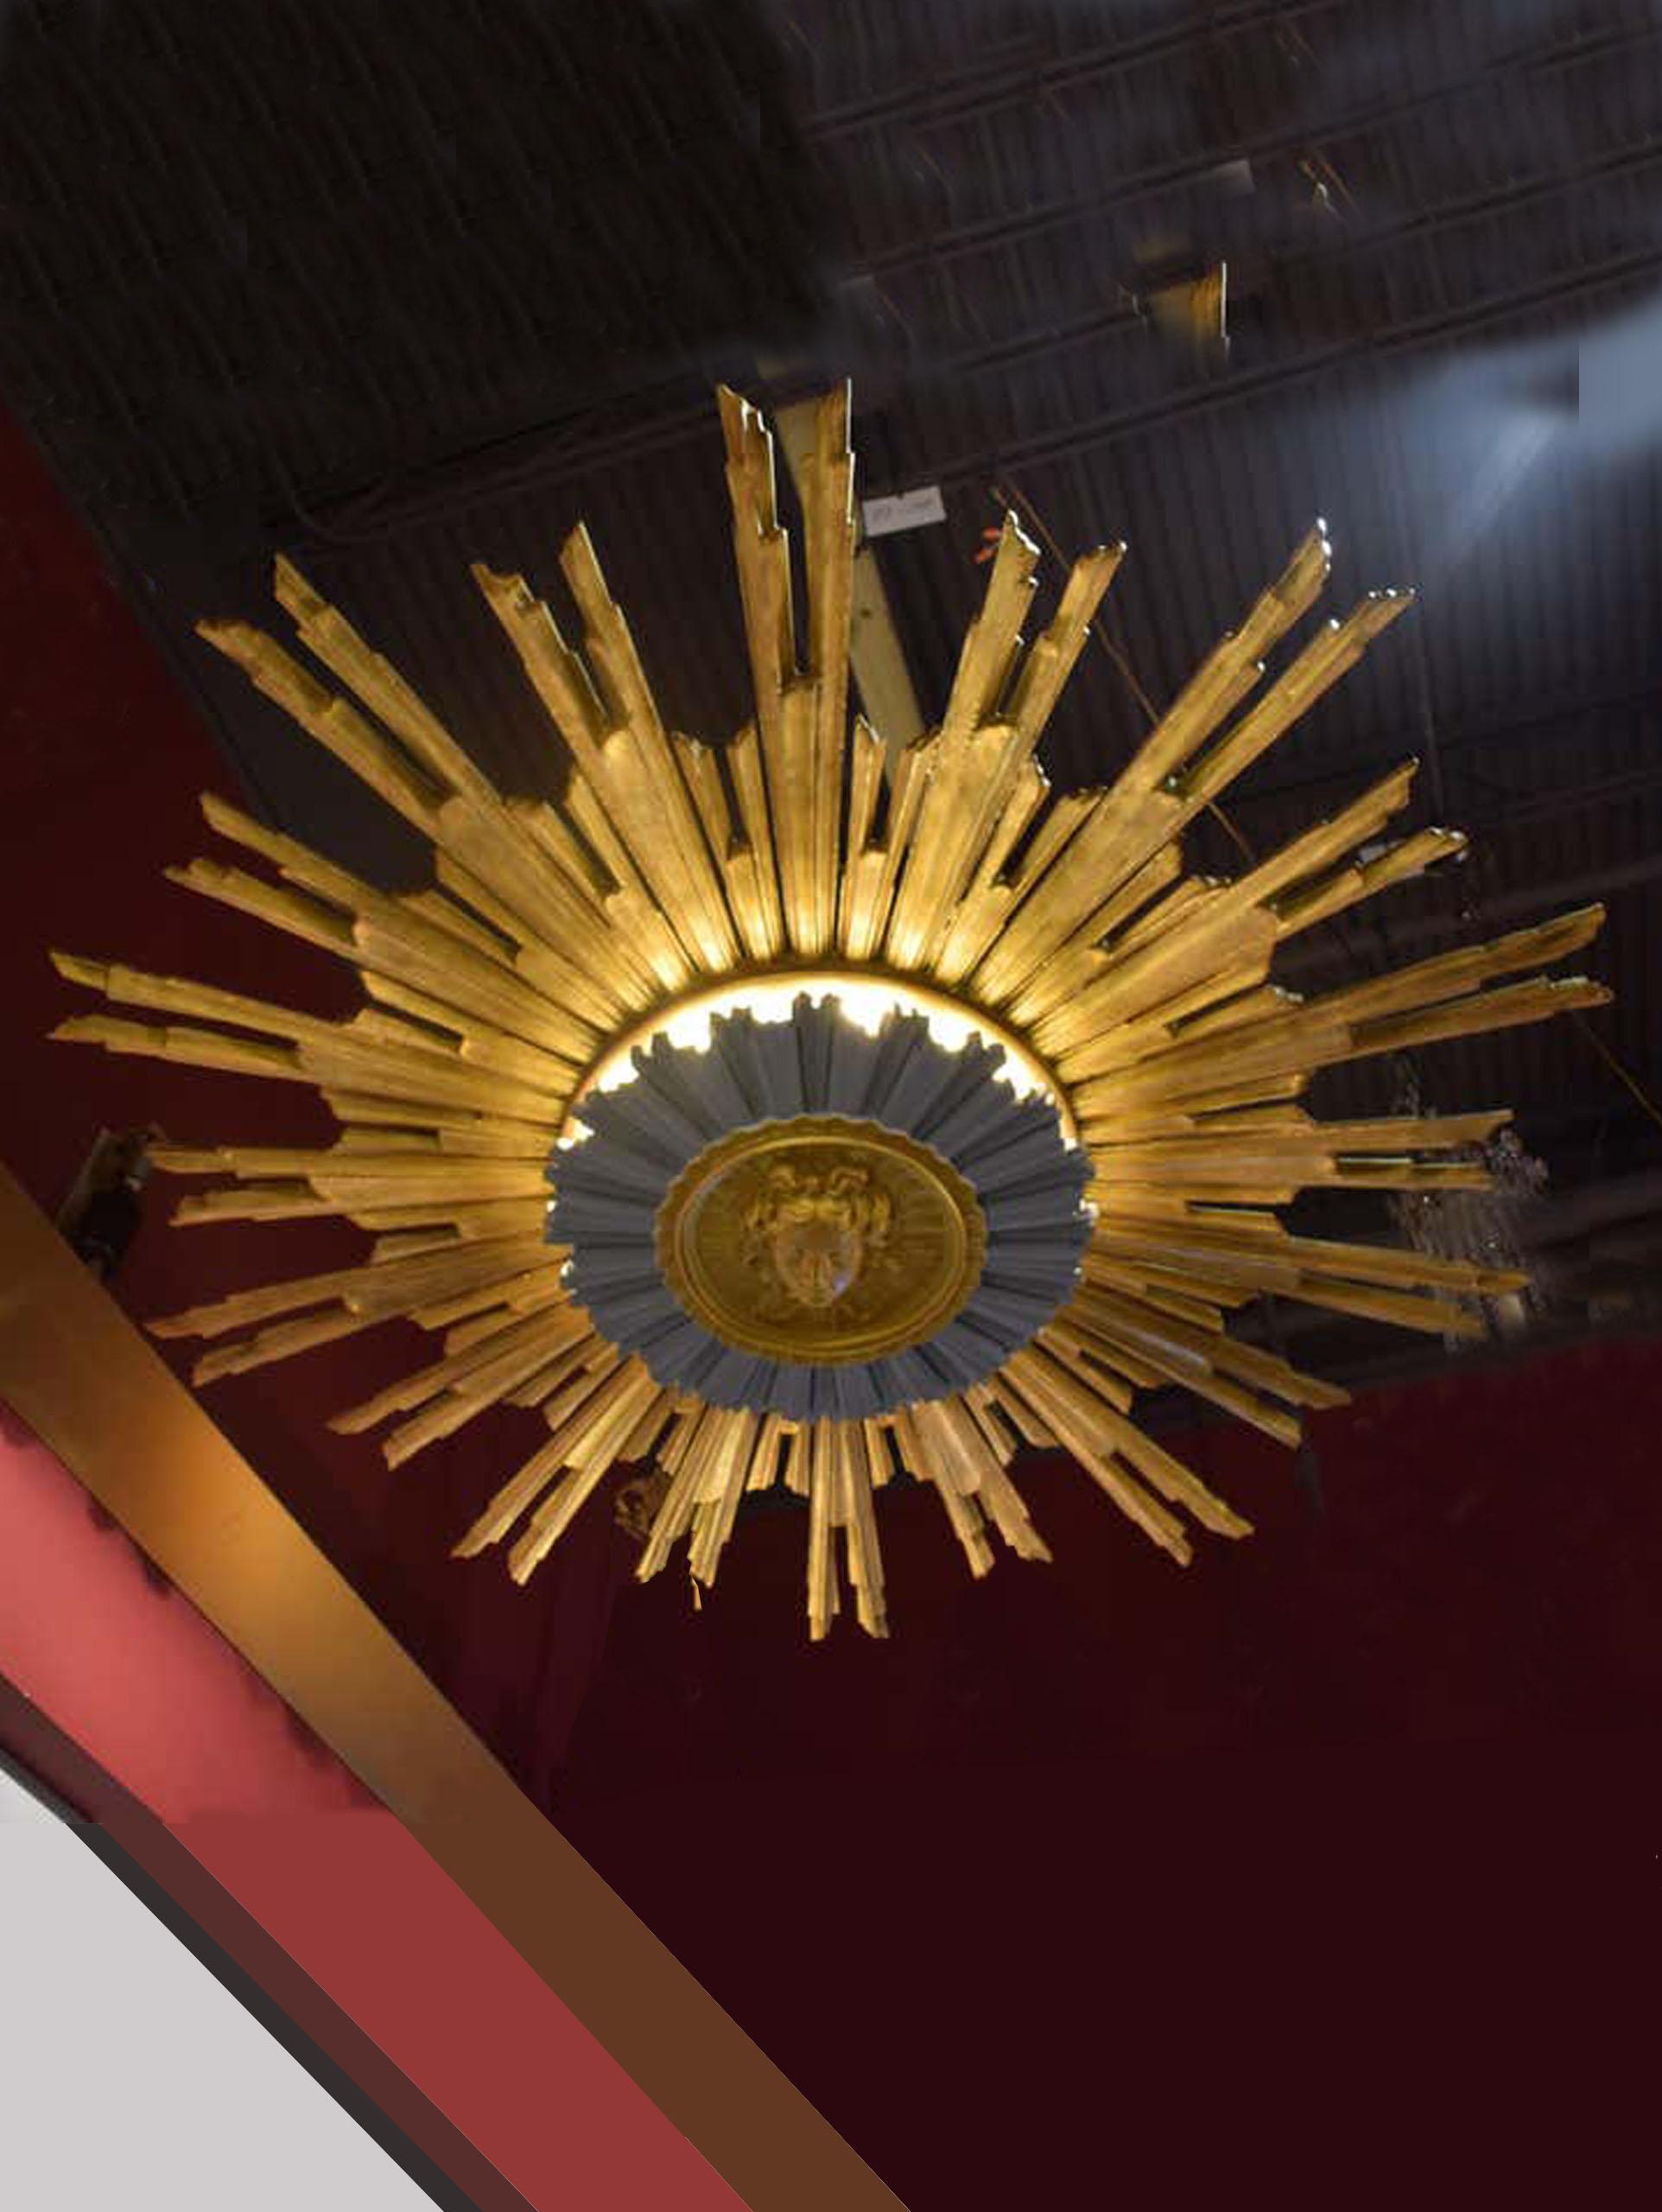 A highly unusual and decorative sunburst flushmounted fixture or pendant. 10-light
Dimensions: Height 8